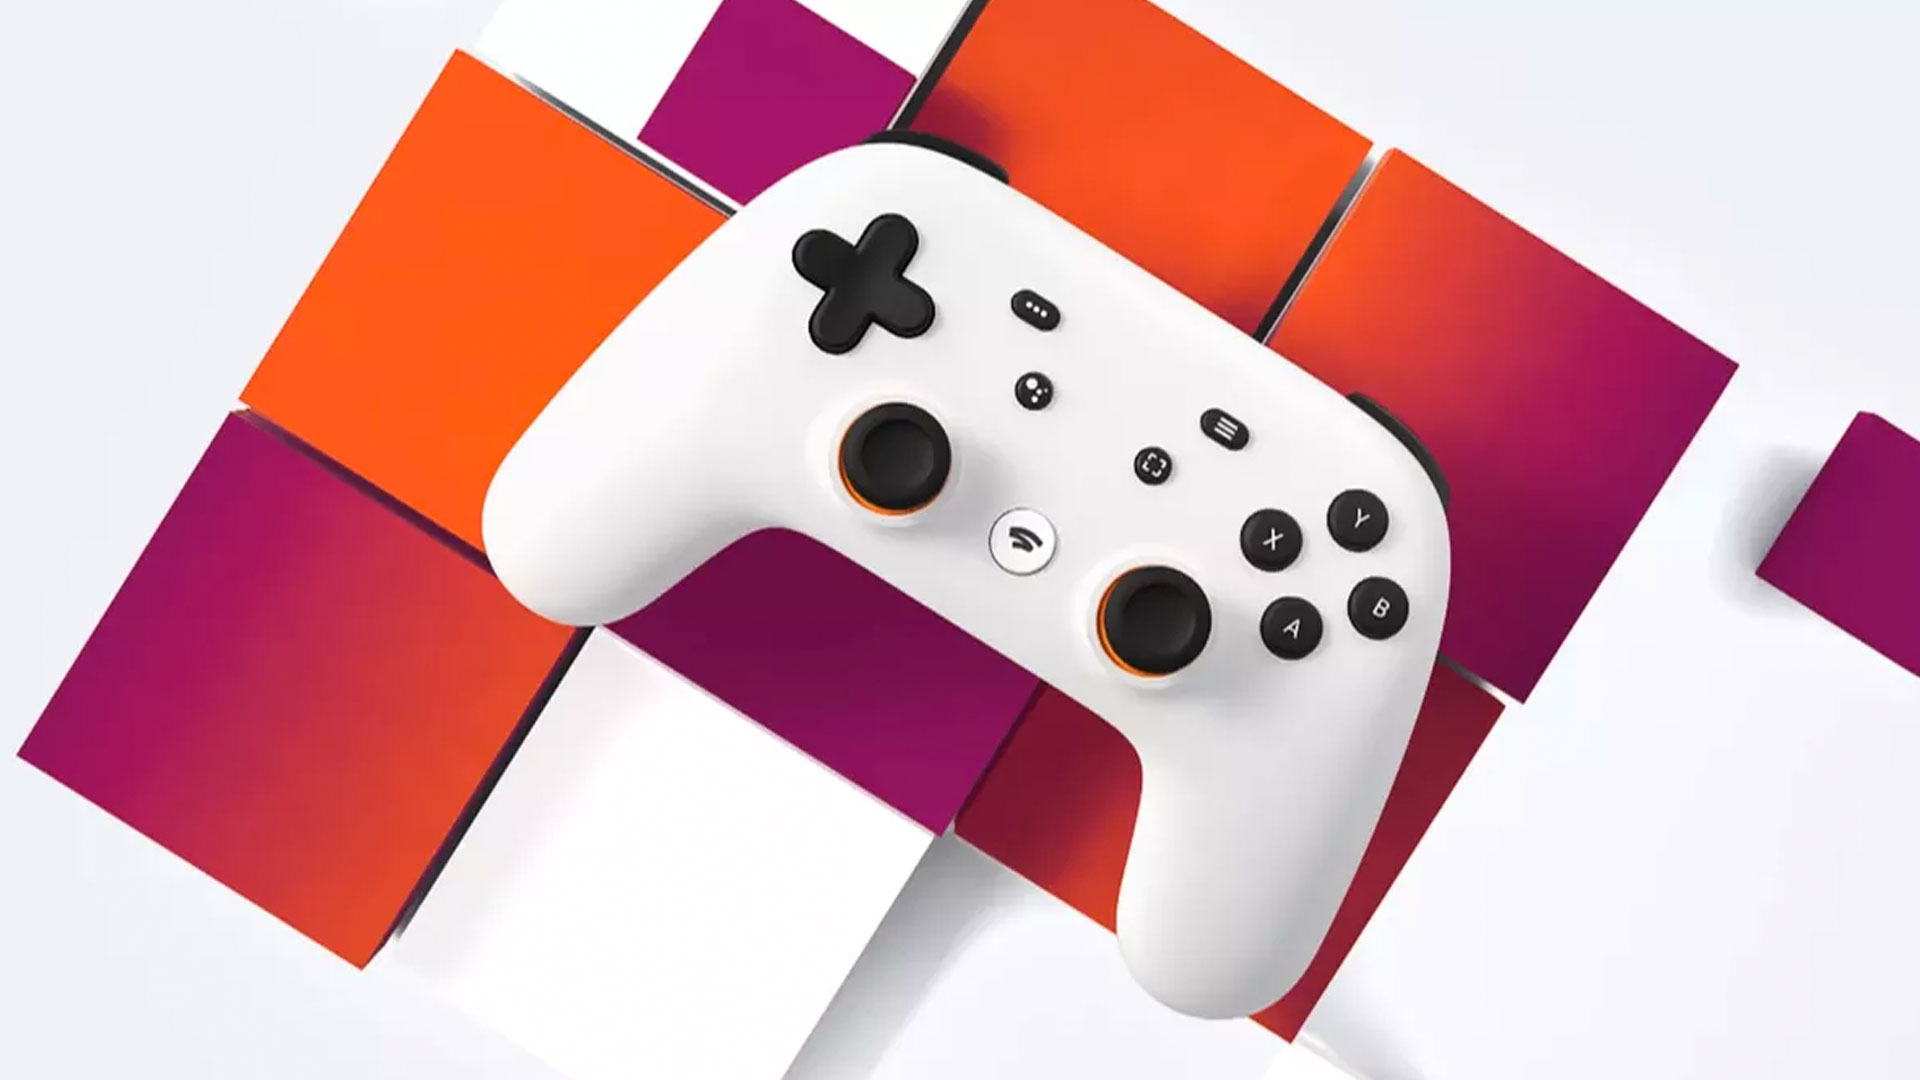 You have one month to switch your Stadia controller to Bluetooth mode, or you’re stuck with wires forever